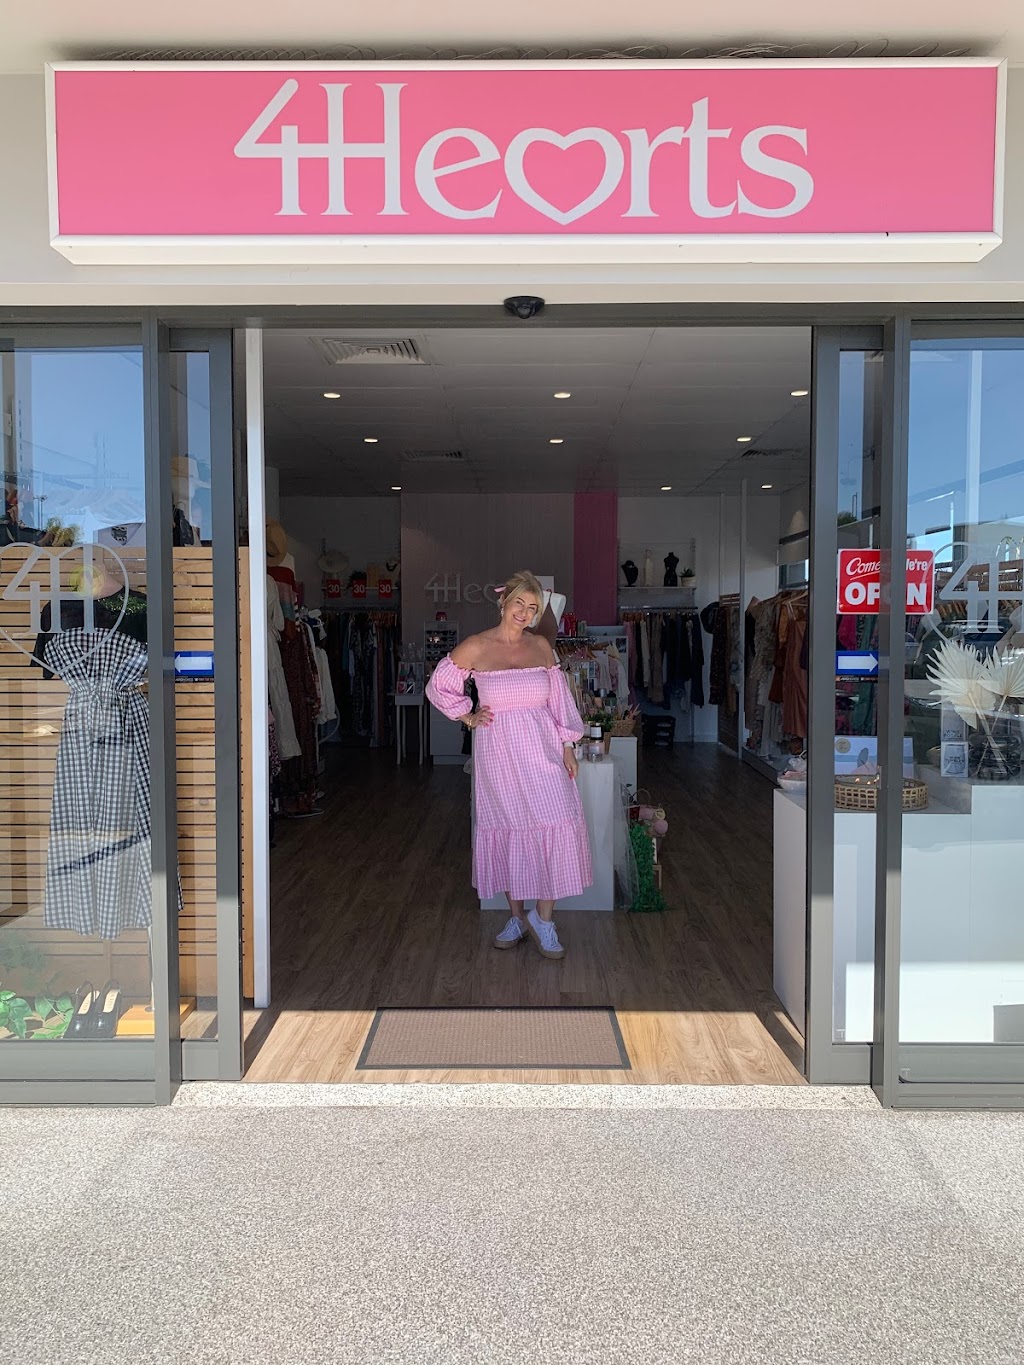 4 Hearts | clothing store | 19th Avenue shops Shop 16A Cnr 19th avenue and, Angelica St, Palm Beach QLD 4221, Australia | 0419680862 OR +61 419 680 862